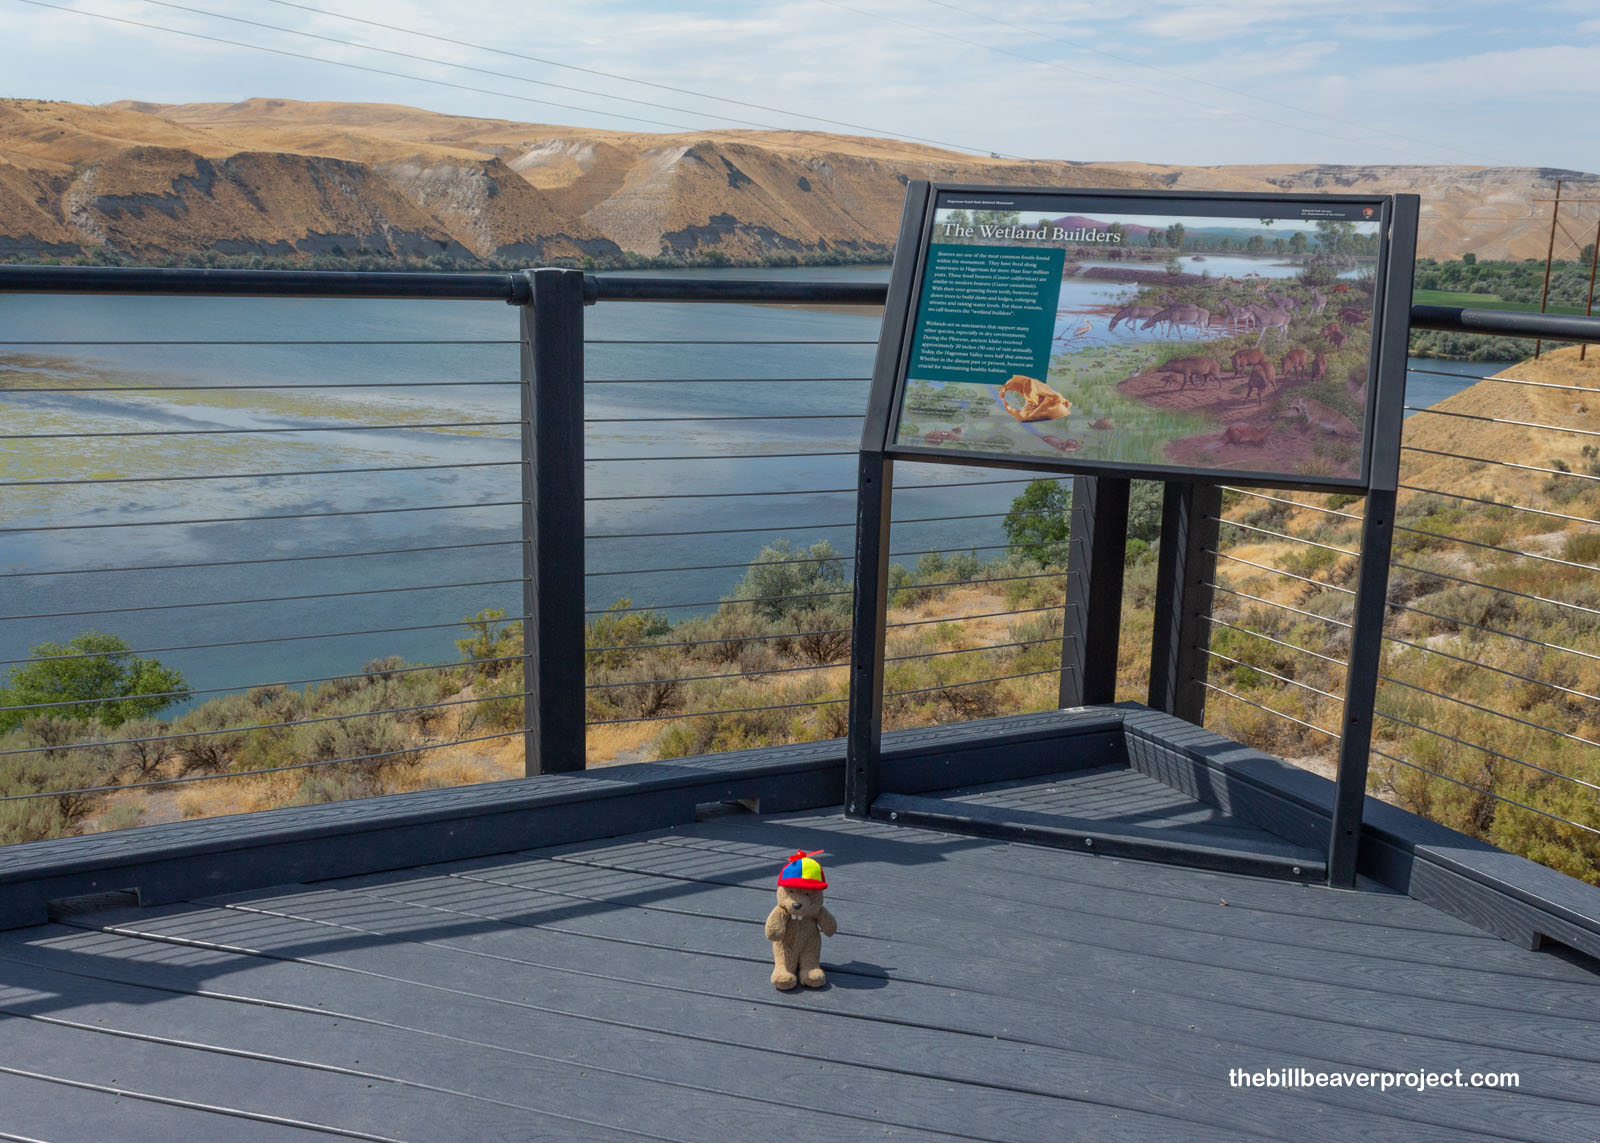 The Snake River overlook!